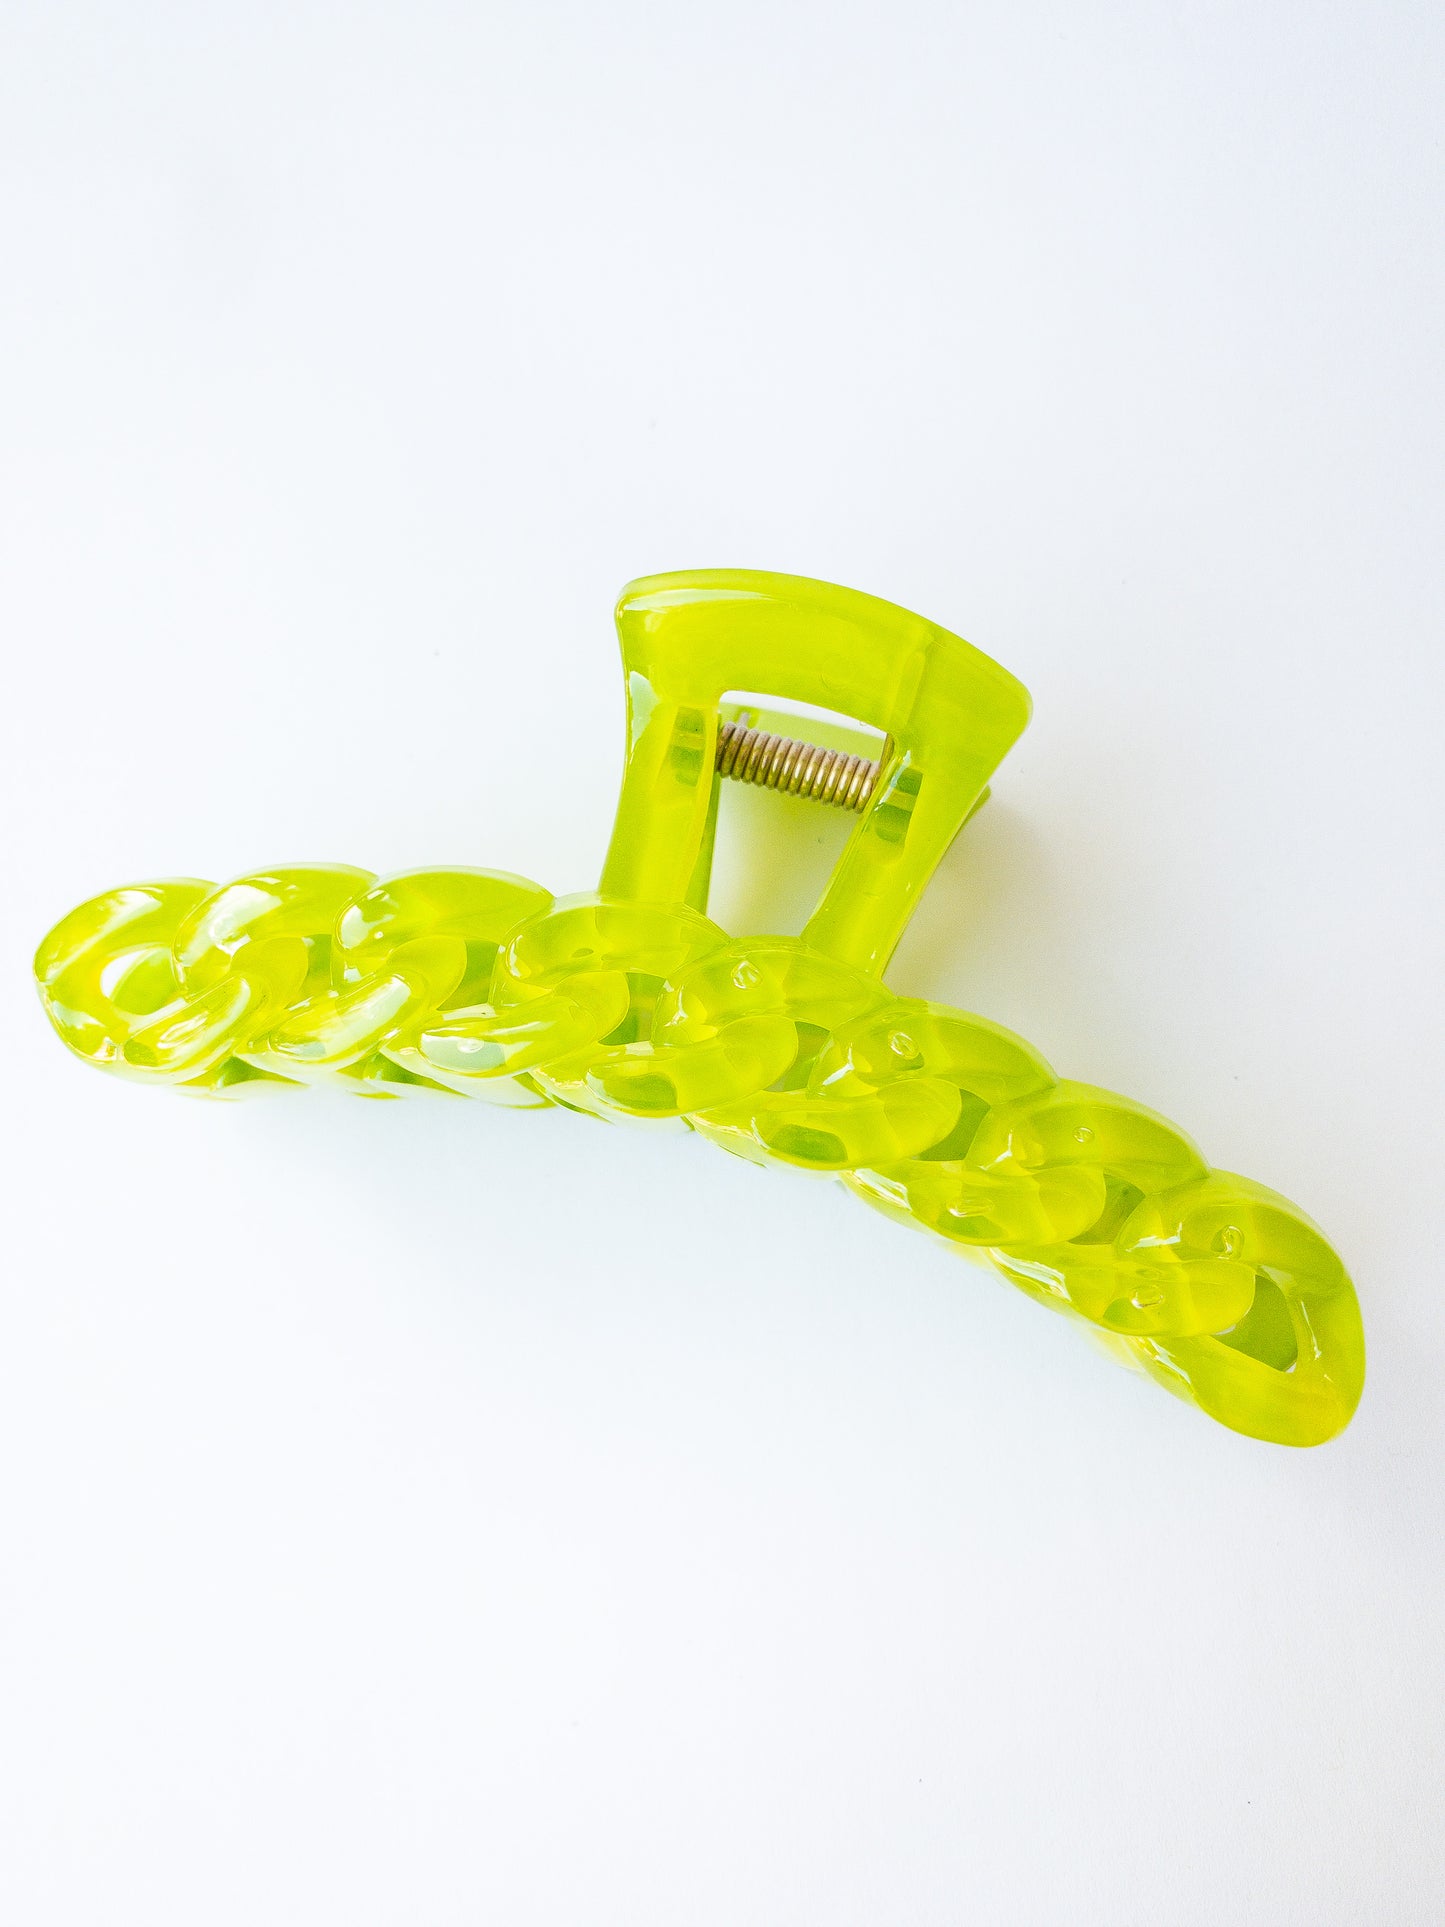 The brightest chain link hair claw clip in the most delectable candy hue! This green hair claw is large in size and strong enough to sweep up your hair in a messy updo. You're going to want one in every color!